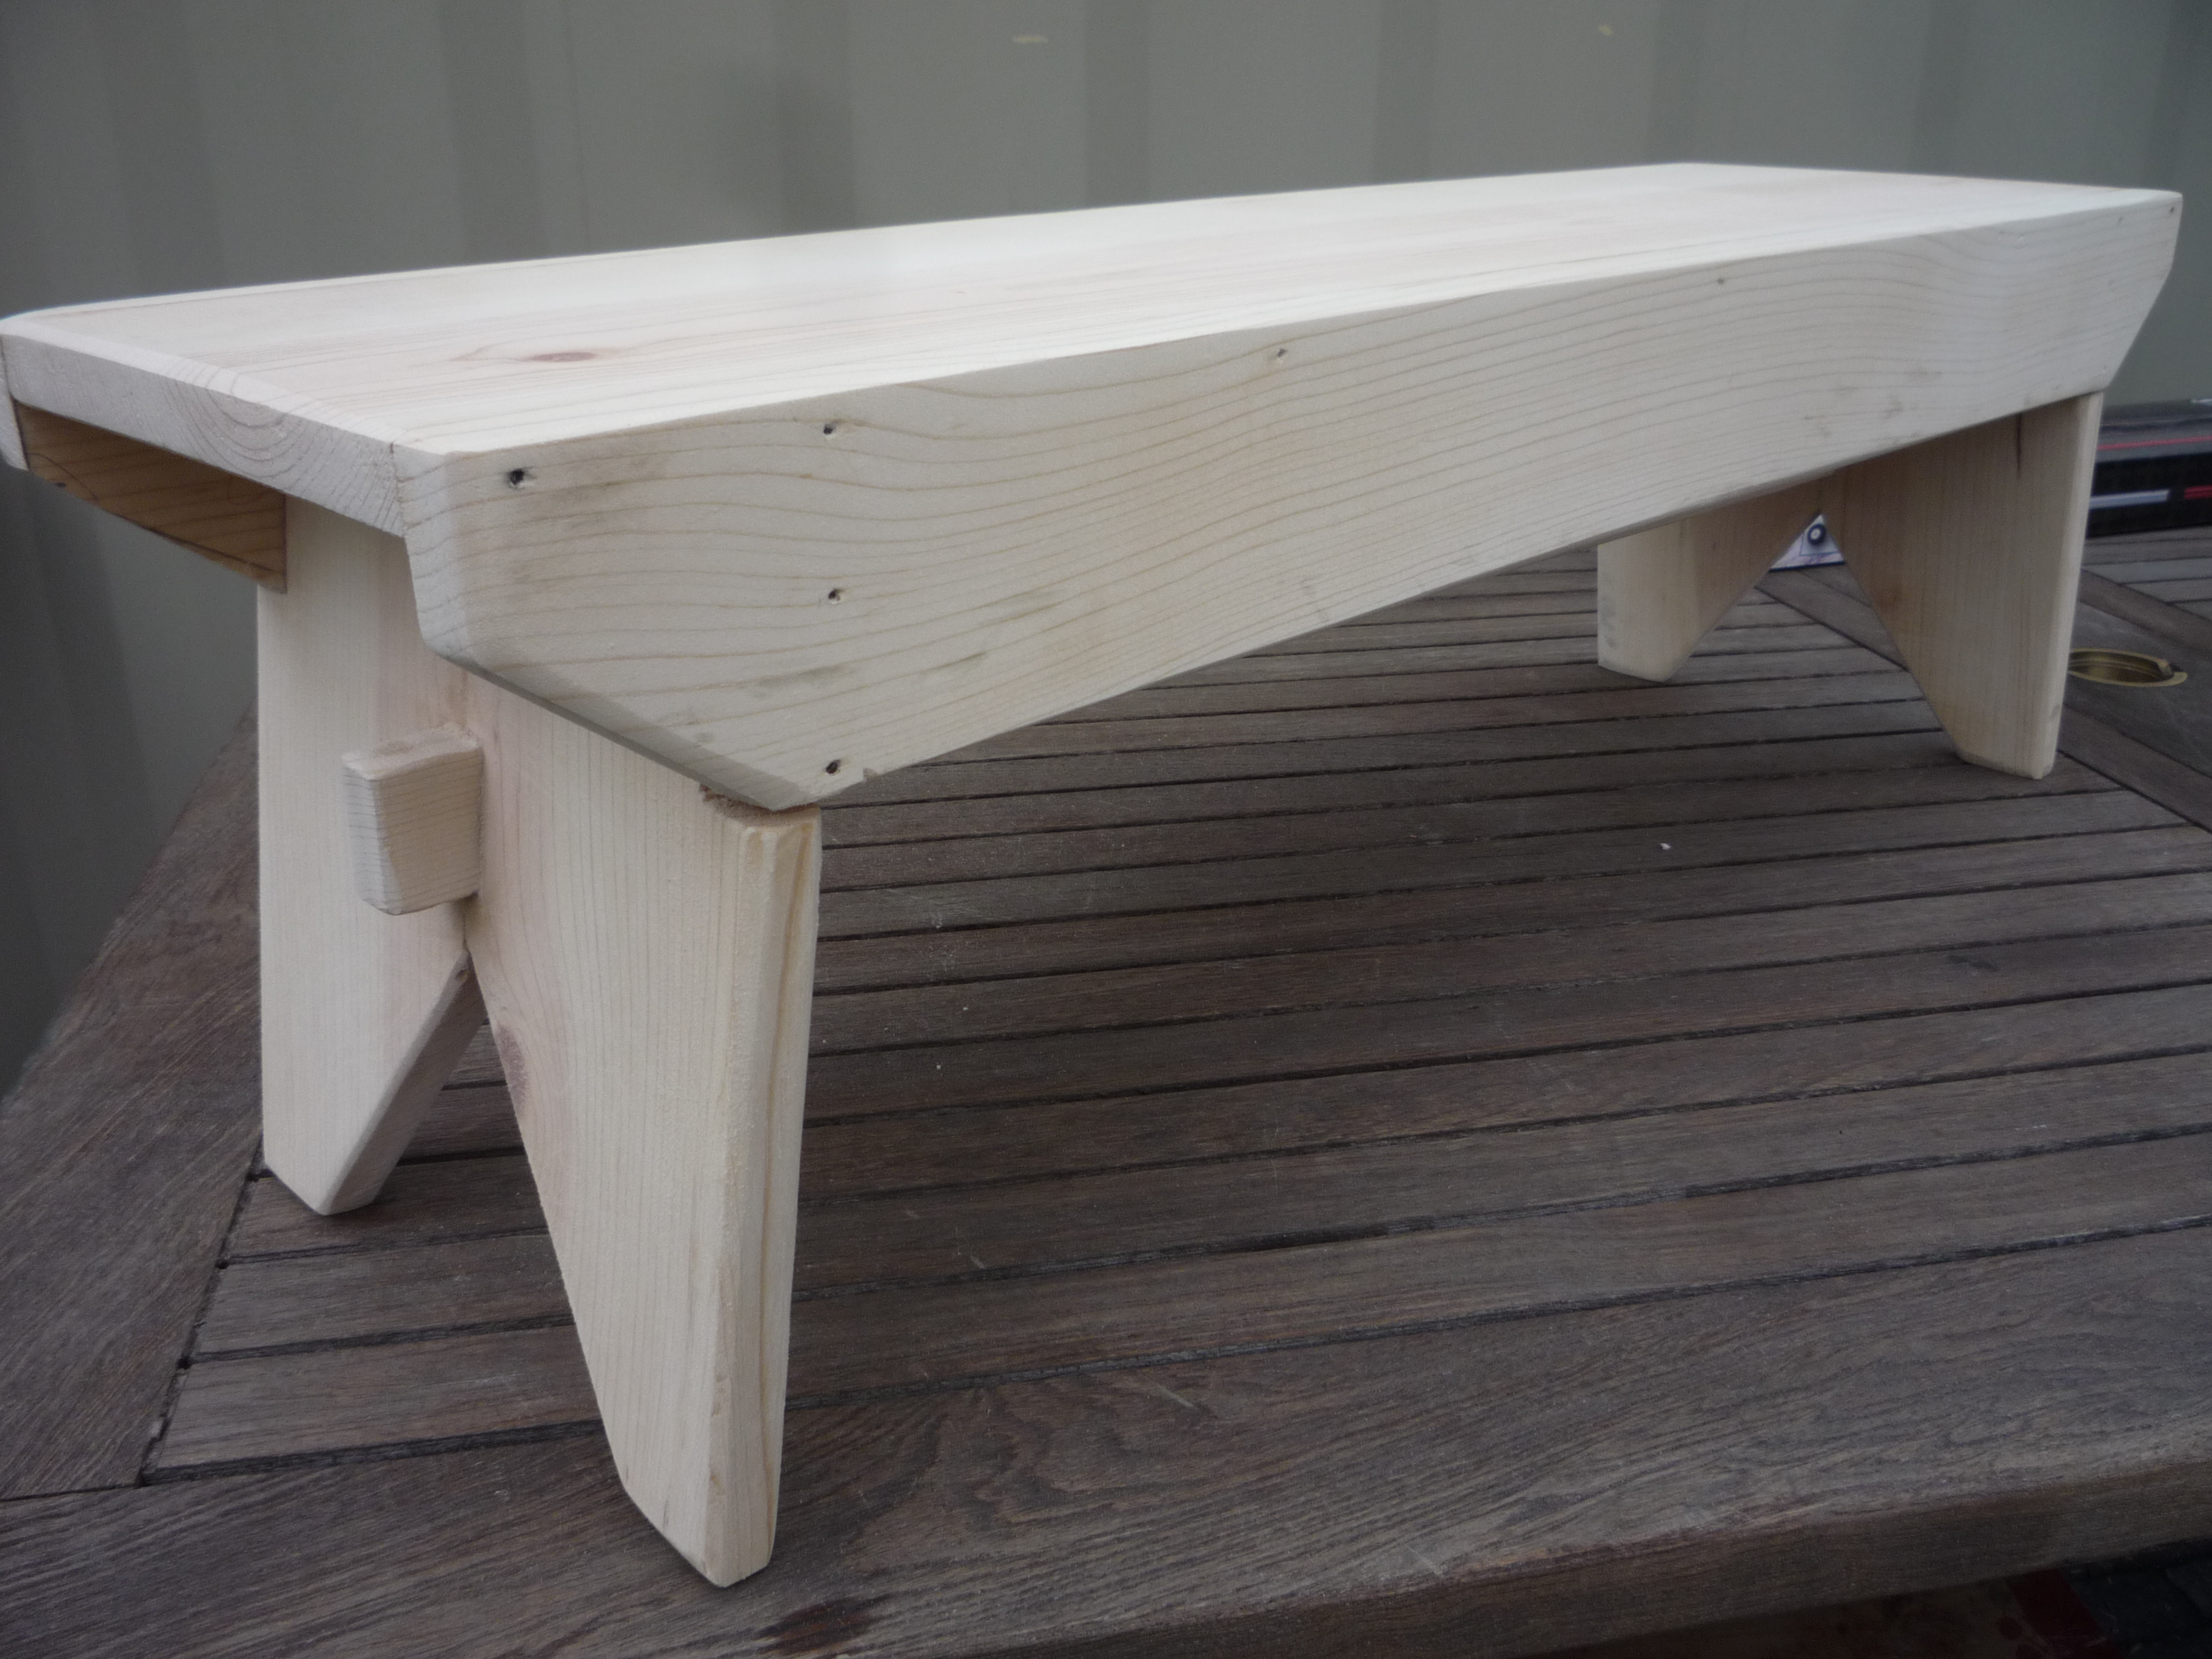 This Week In the Classroom: The Simple Bench woodshopcowboy